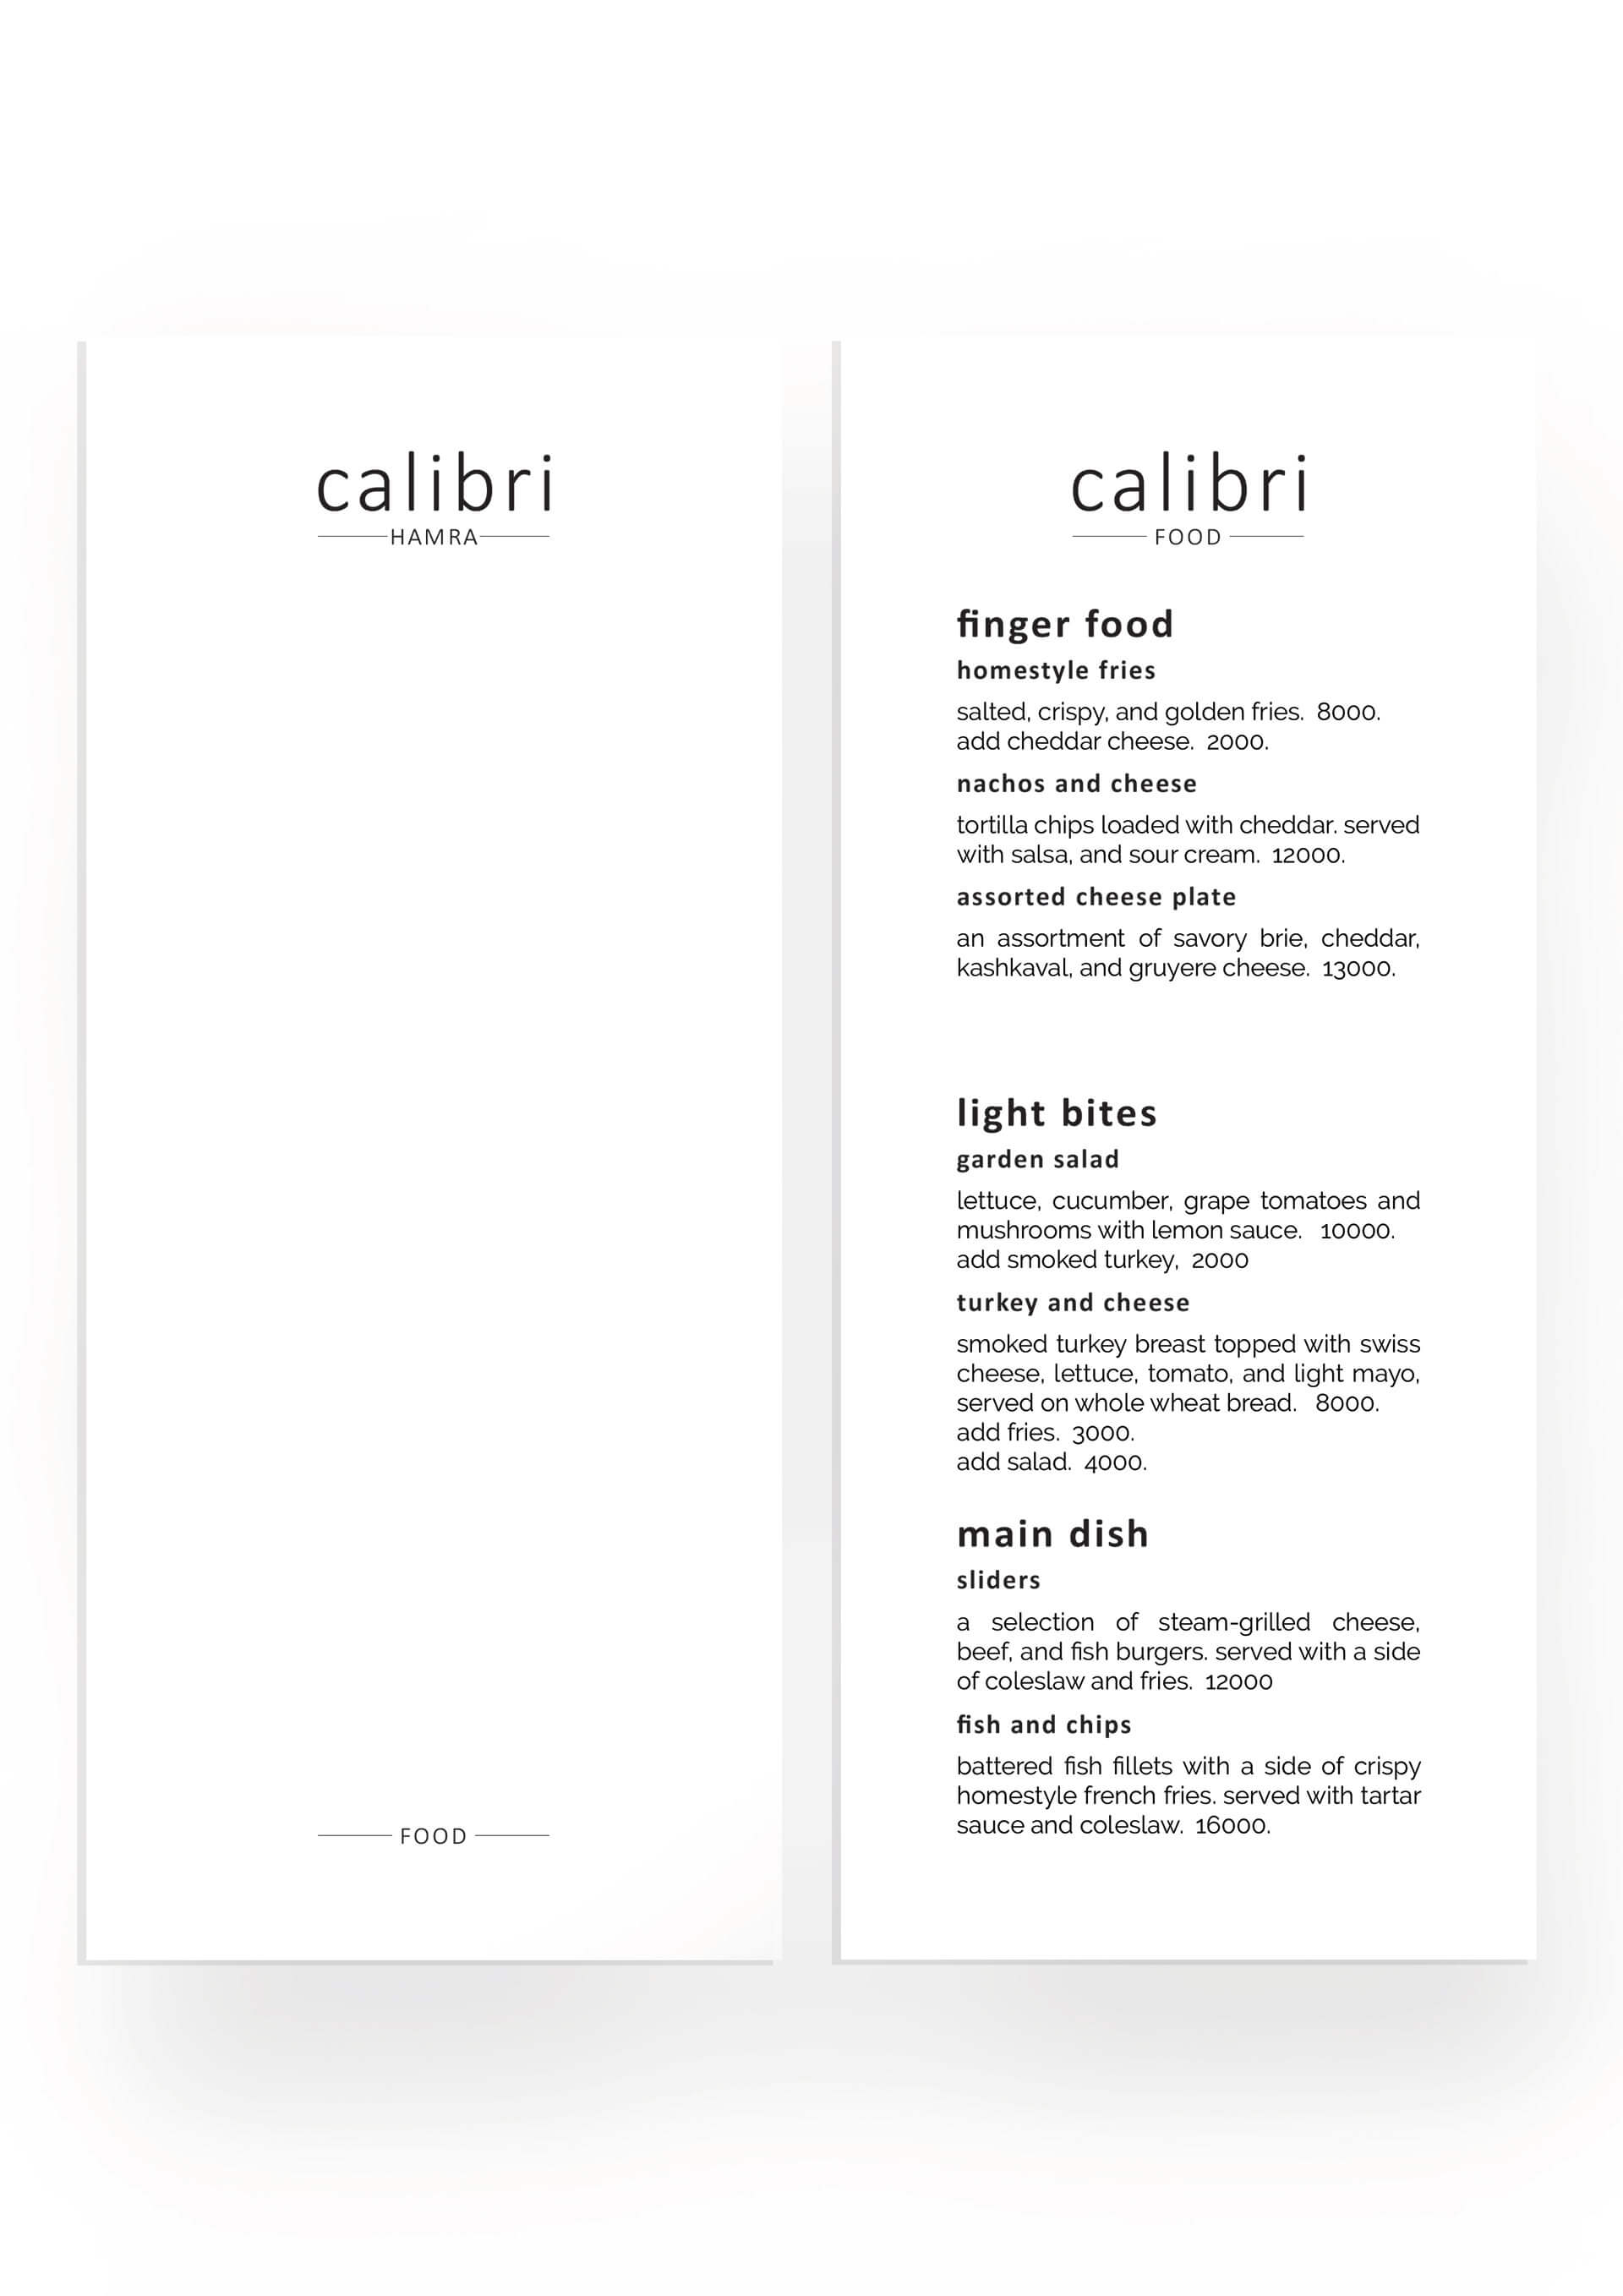 Food Menu Design for the Pub with Carefully Studied Layout Design to Encourage Customer Purchase or Conversion